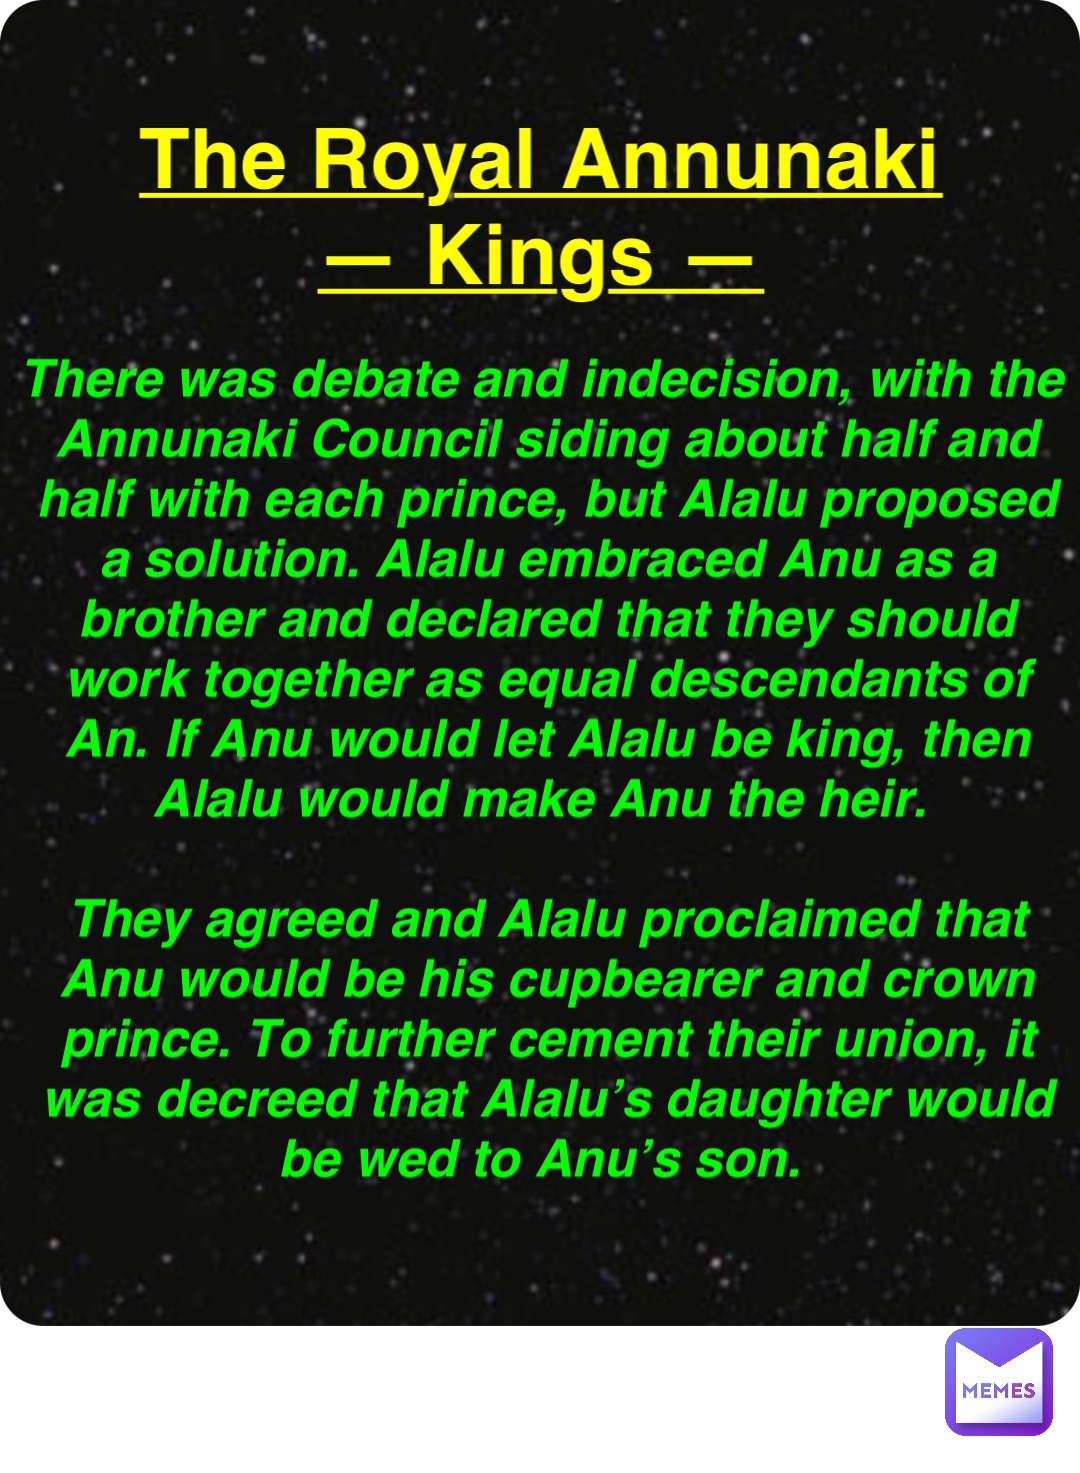 Double tap to edit The Royal Annunaki
— Kings — There was debate and indecision, with the Annunaki Council siding about half and half with each prince, but Alalu proposed a solution. Alalu embraced Anu as a brother and declared that they should work together as equal descendants of An. If Anu would let Alalu be king, then Alalu would make Anu the heir.

They agreed and Alalu proclaimed that Anu would be his cupbearer and crown prince. To further cement their union, it was decreed that Alalu’s daughter would be wed to Anu’s son.